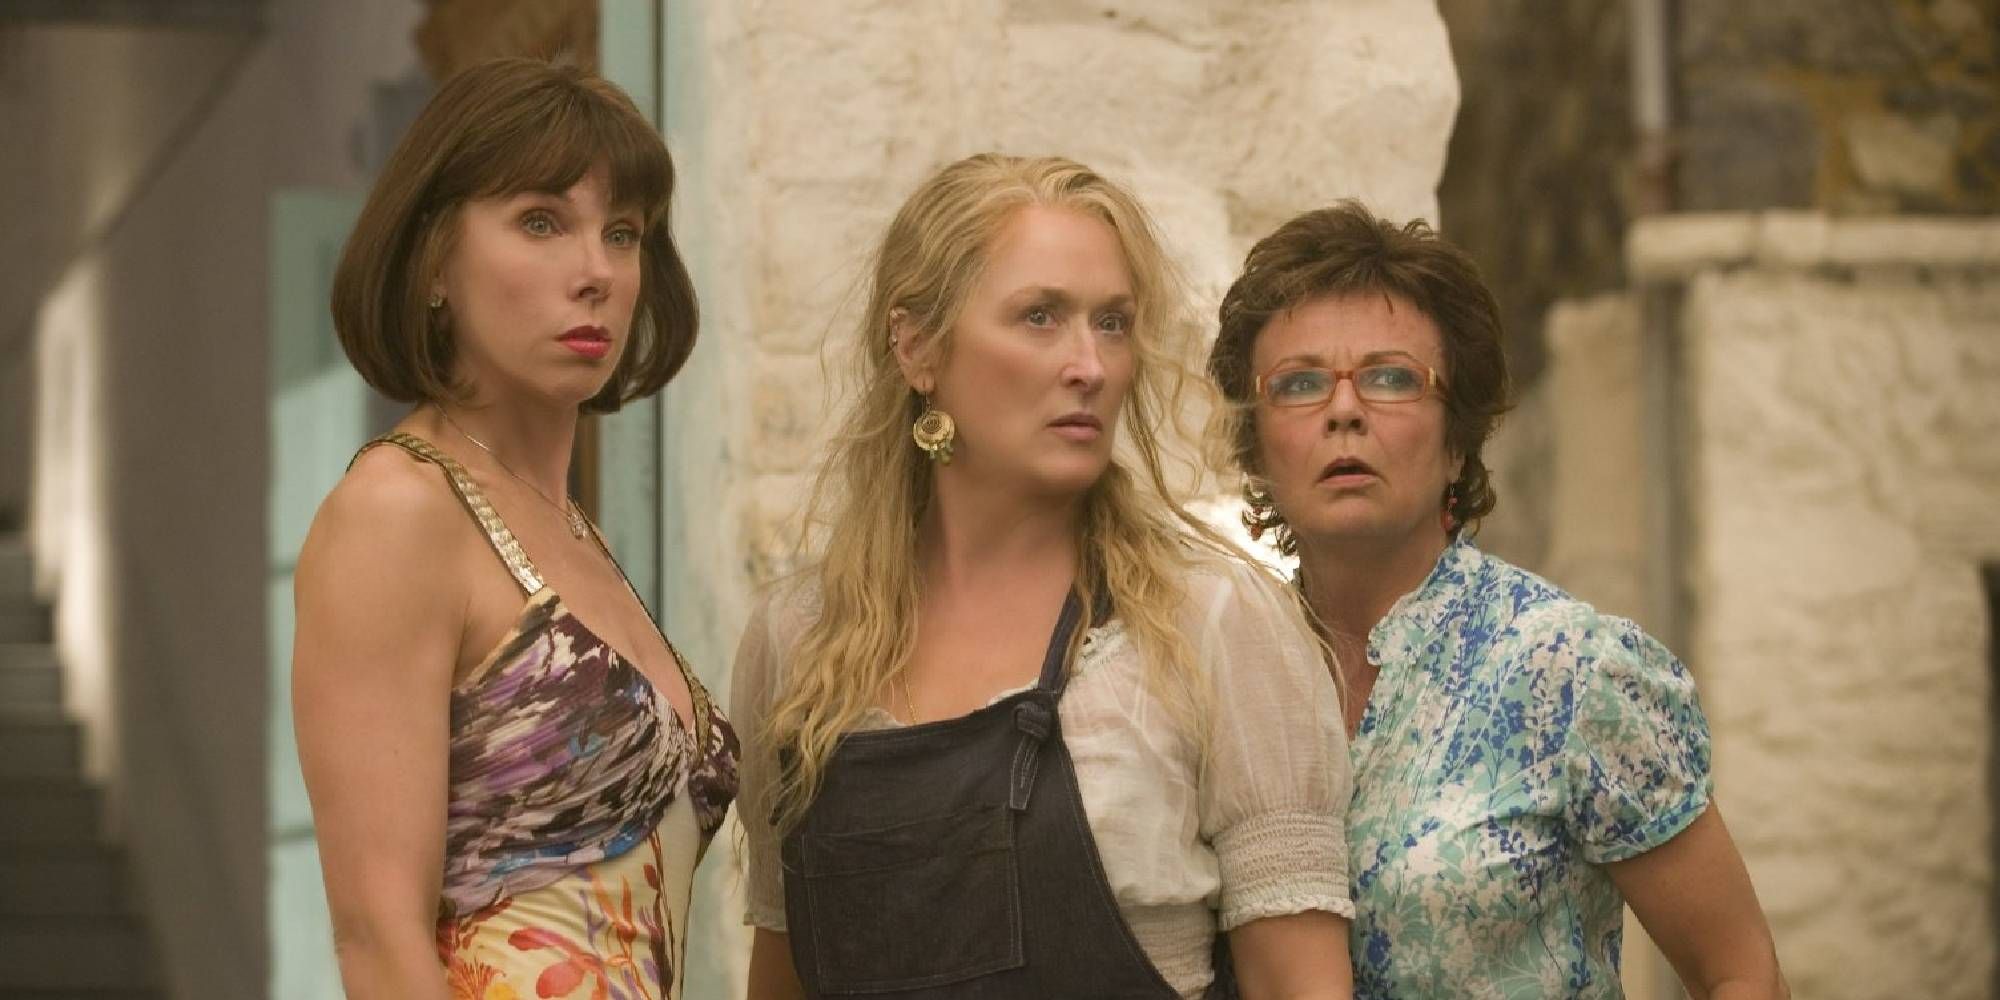 Christine Baranski, Meryl Streep, and Julie Walters standing next to each other while looking surprised in Mamma Mia!